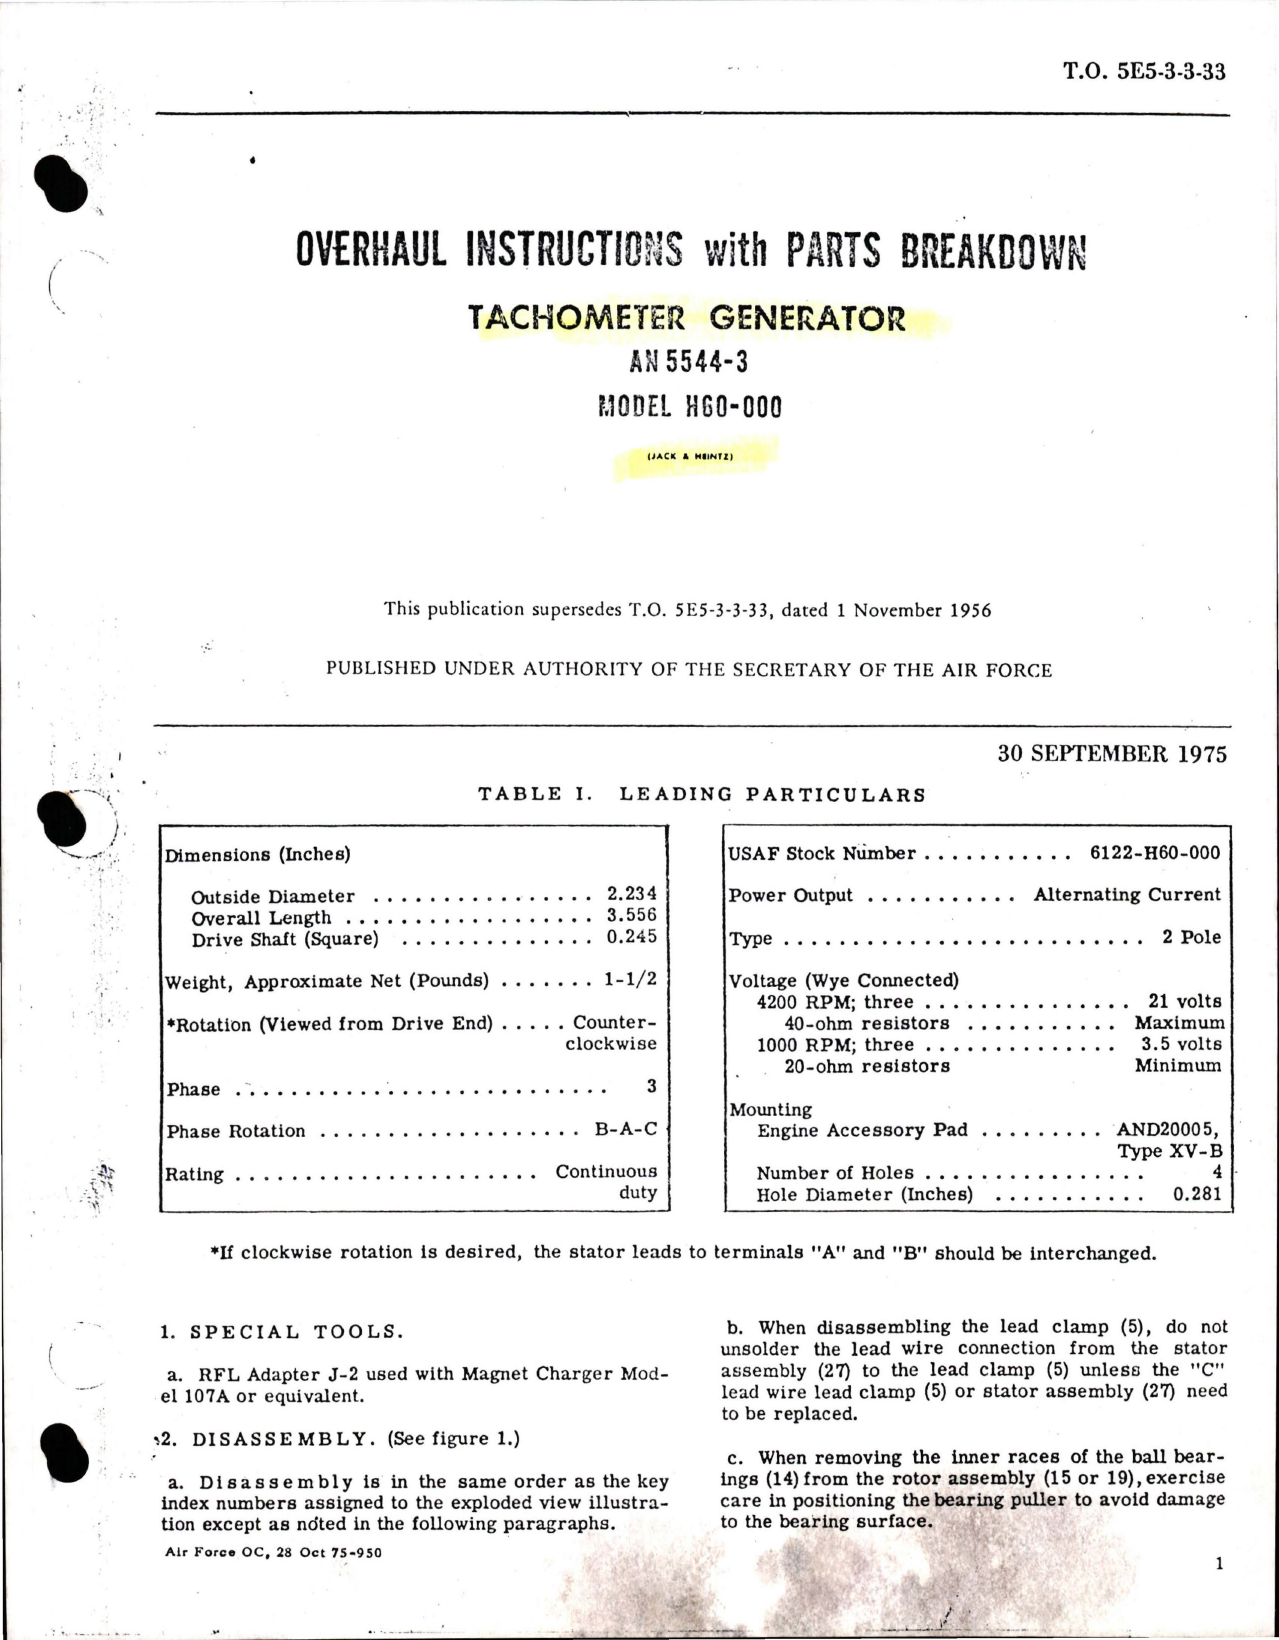 Sample page 1 from AirCorps Library document: Overhaul Instructions with Parts Breakdown for Tachometer Generator - AN 5544-3 - Model H60-000